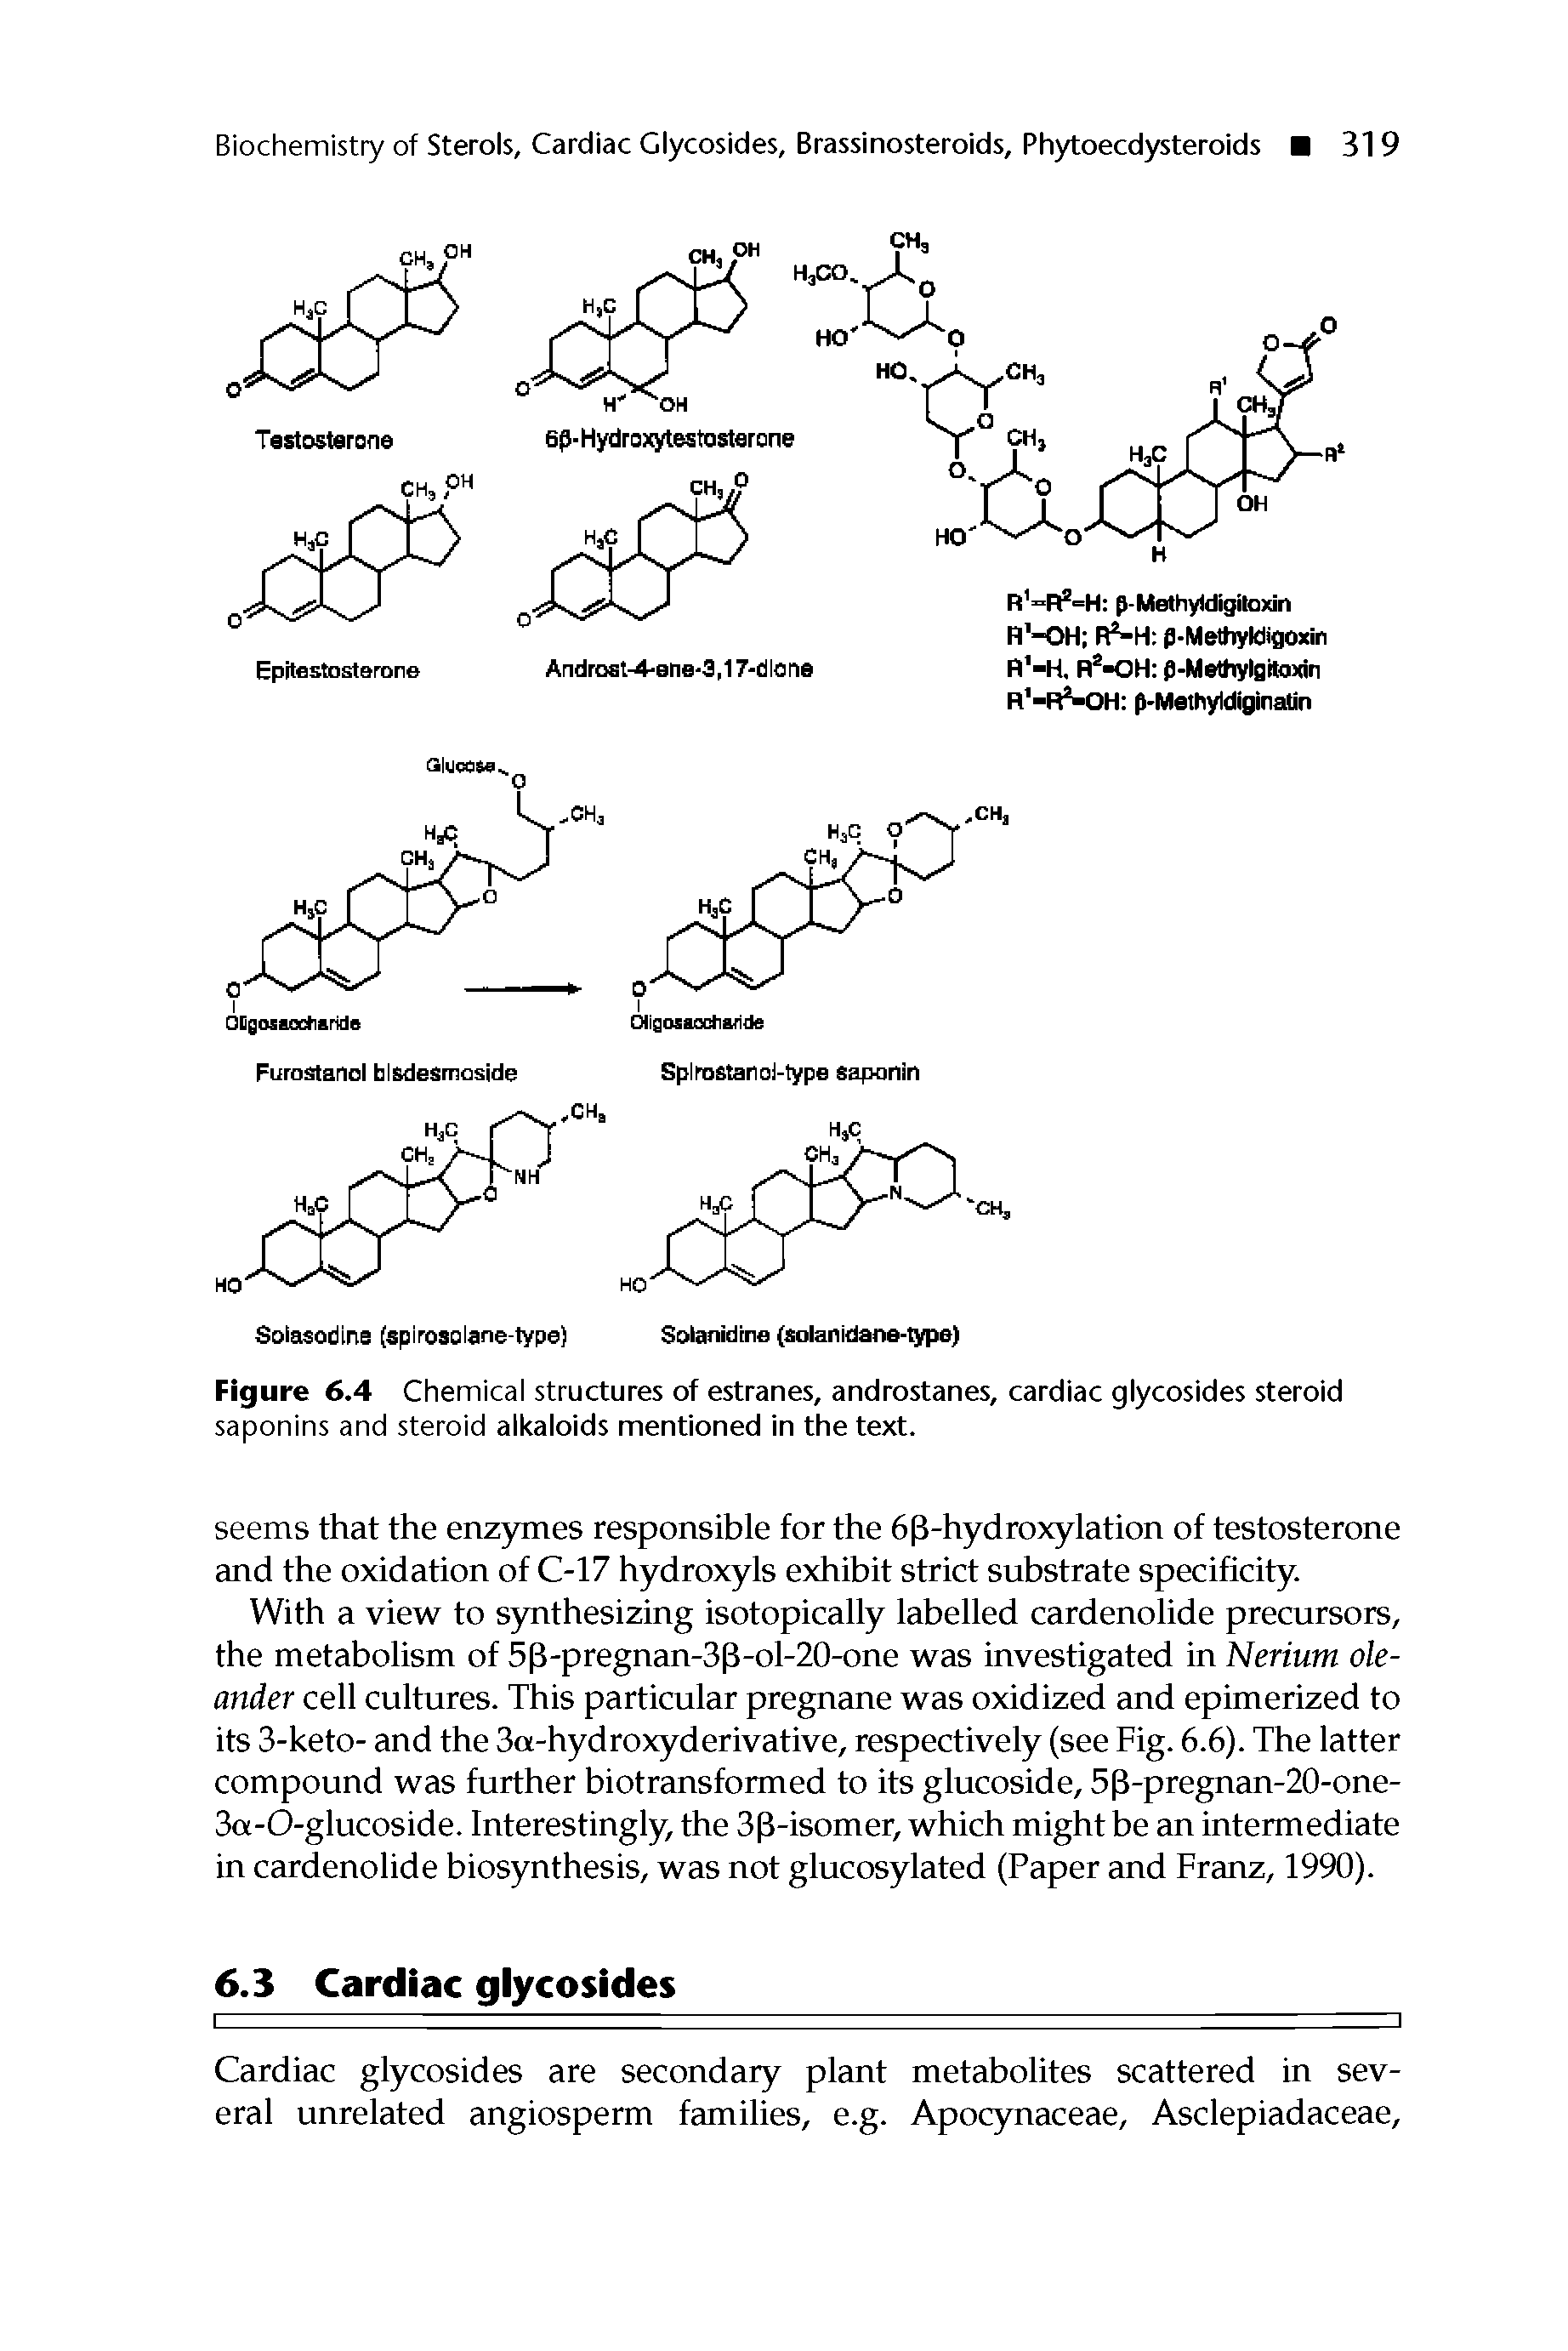 Figure 6.4 Chemical structures of estranes, androstanes, cardiac glycosides steroid saponins and steroid alkaloids mentioned in the text.